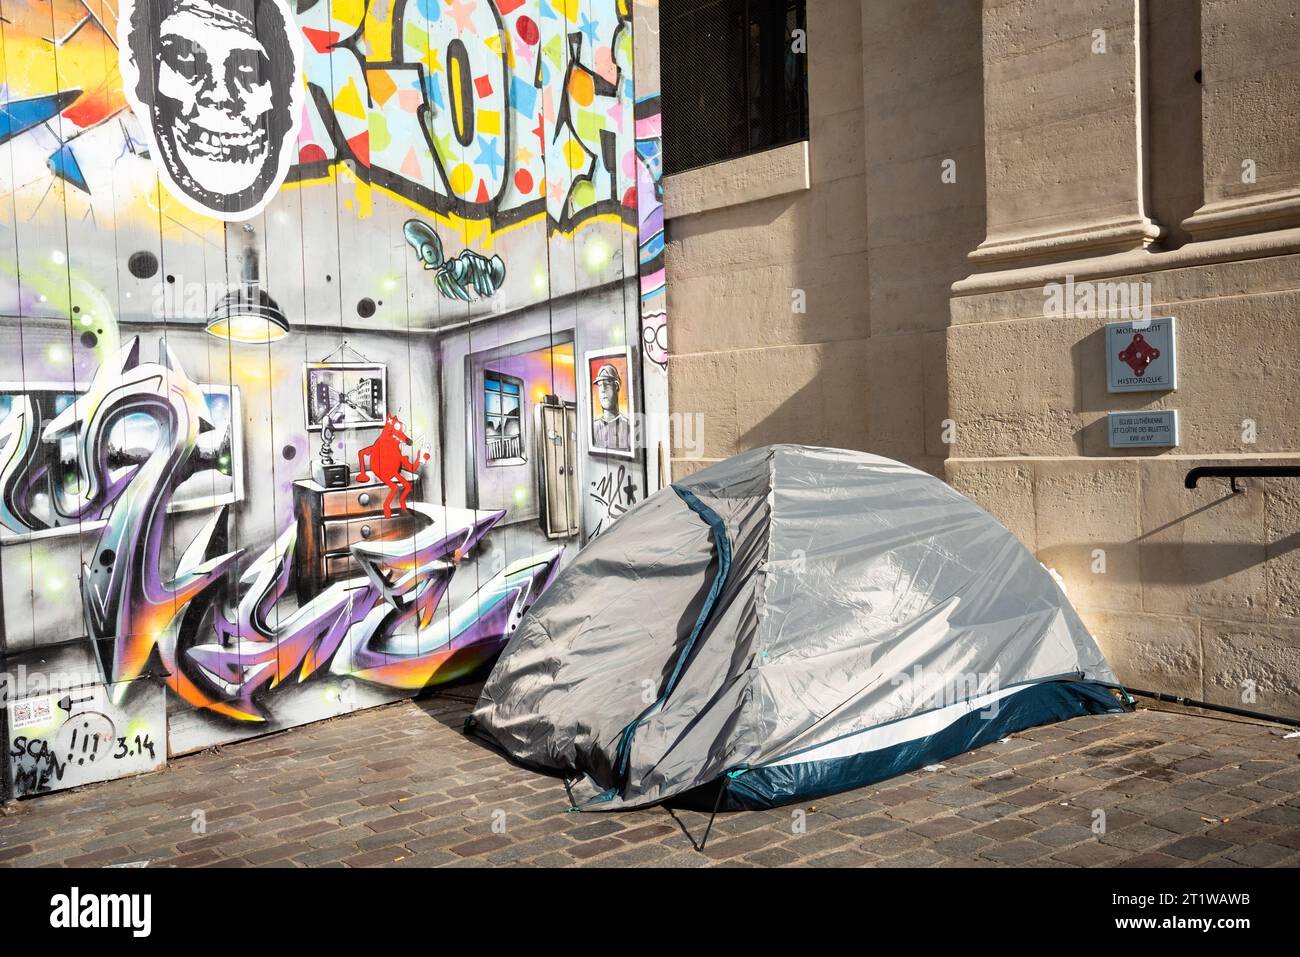 Paris, France - February 21, 2023: Social contrsts. Tent of homeless person, apartment graffiti and plate of Historic Monument (belonging to a church) Stock Photo